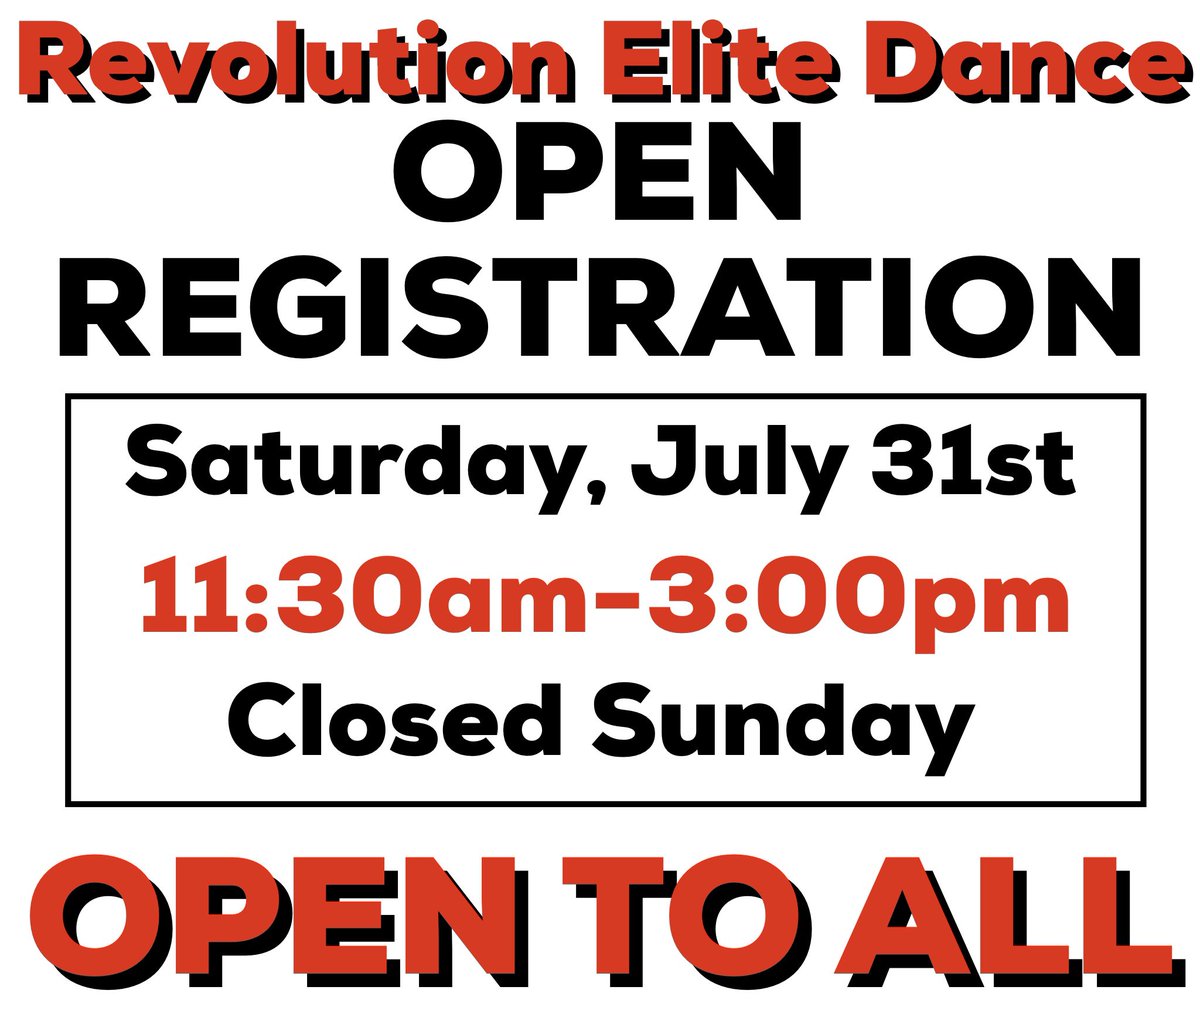 Revolution Elite Dance OPEN REGISTRATION! • Saturday, July 31st from 11:30am-3:00pm • OPEN TO ALL